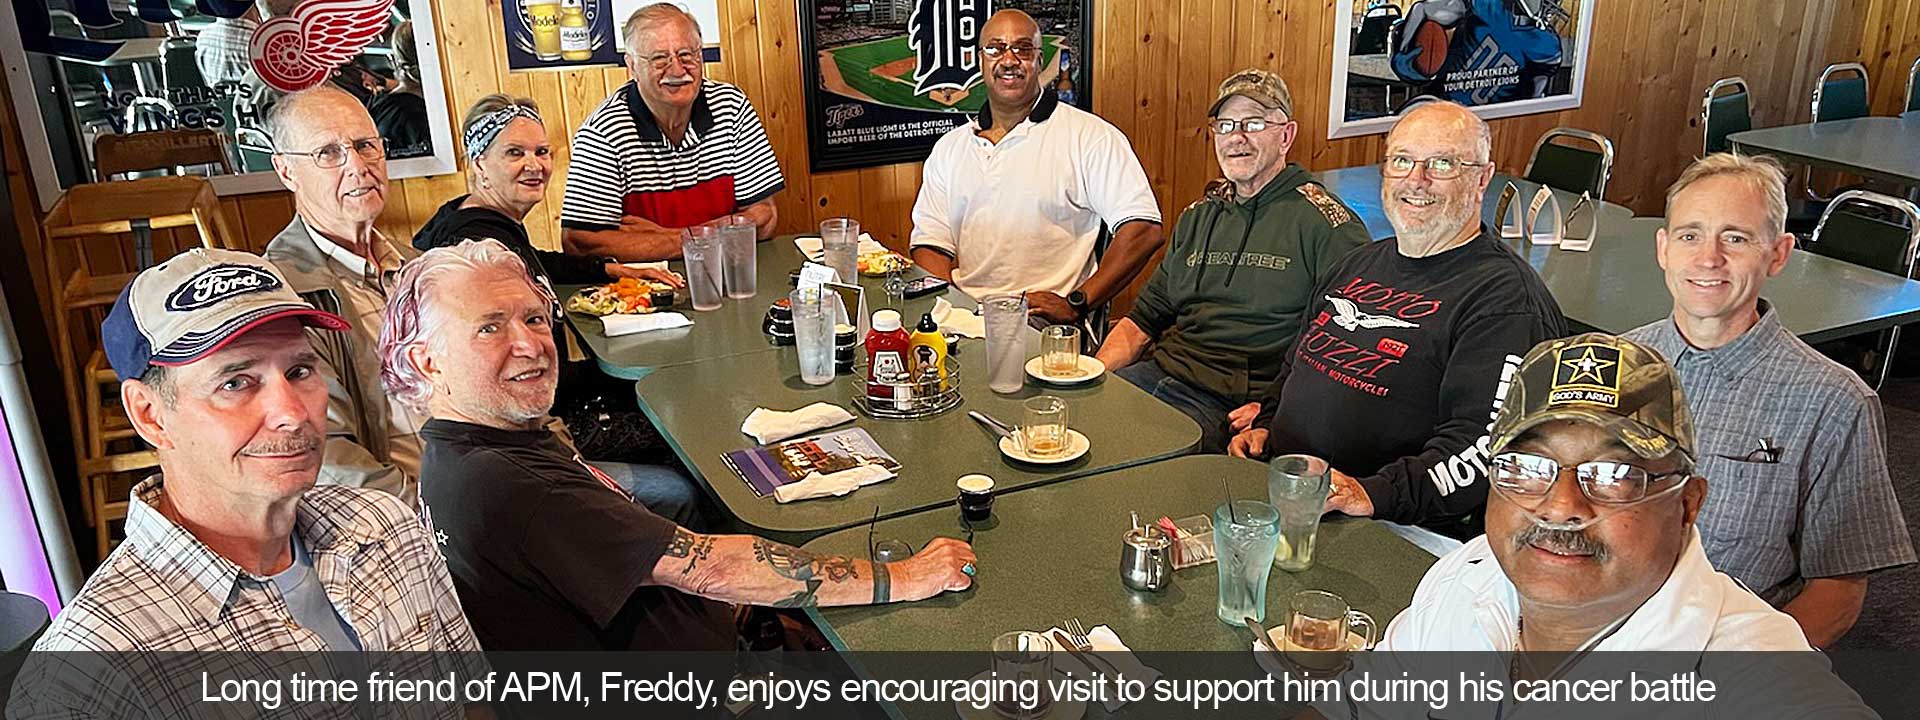 Long time friend of APM, Freddy, enjoys encouraging visit to support him during his cancer battle